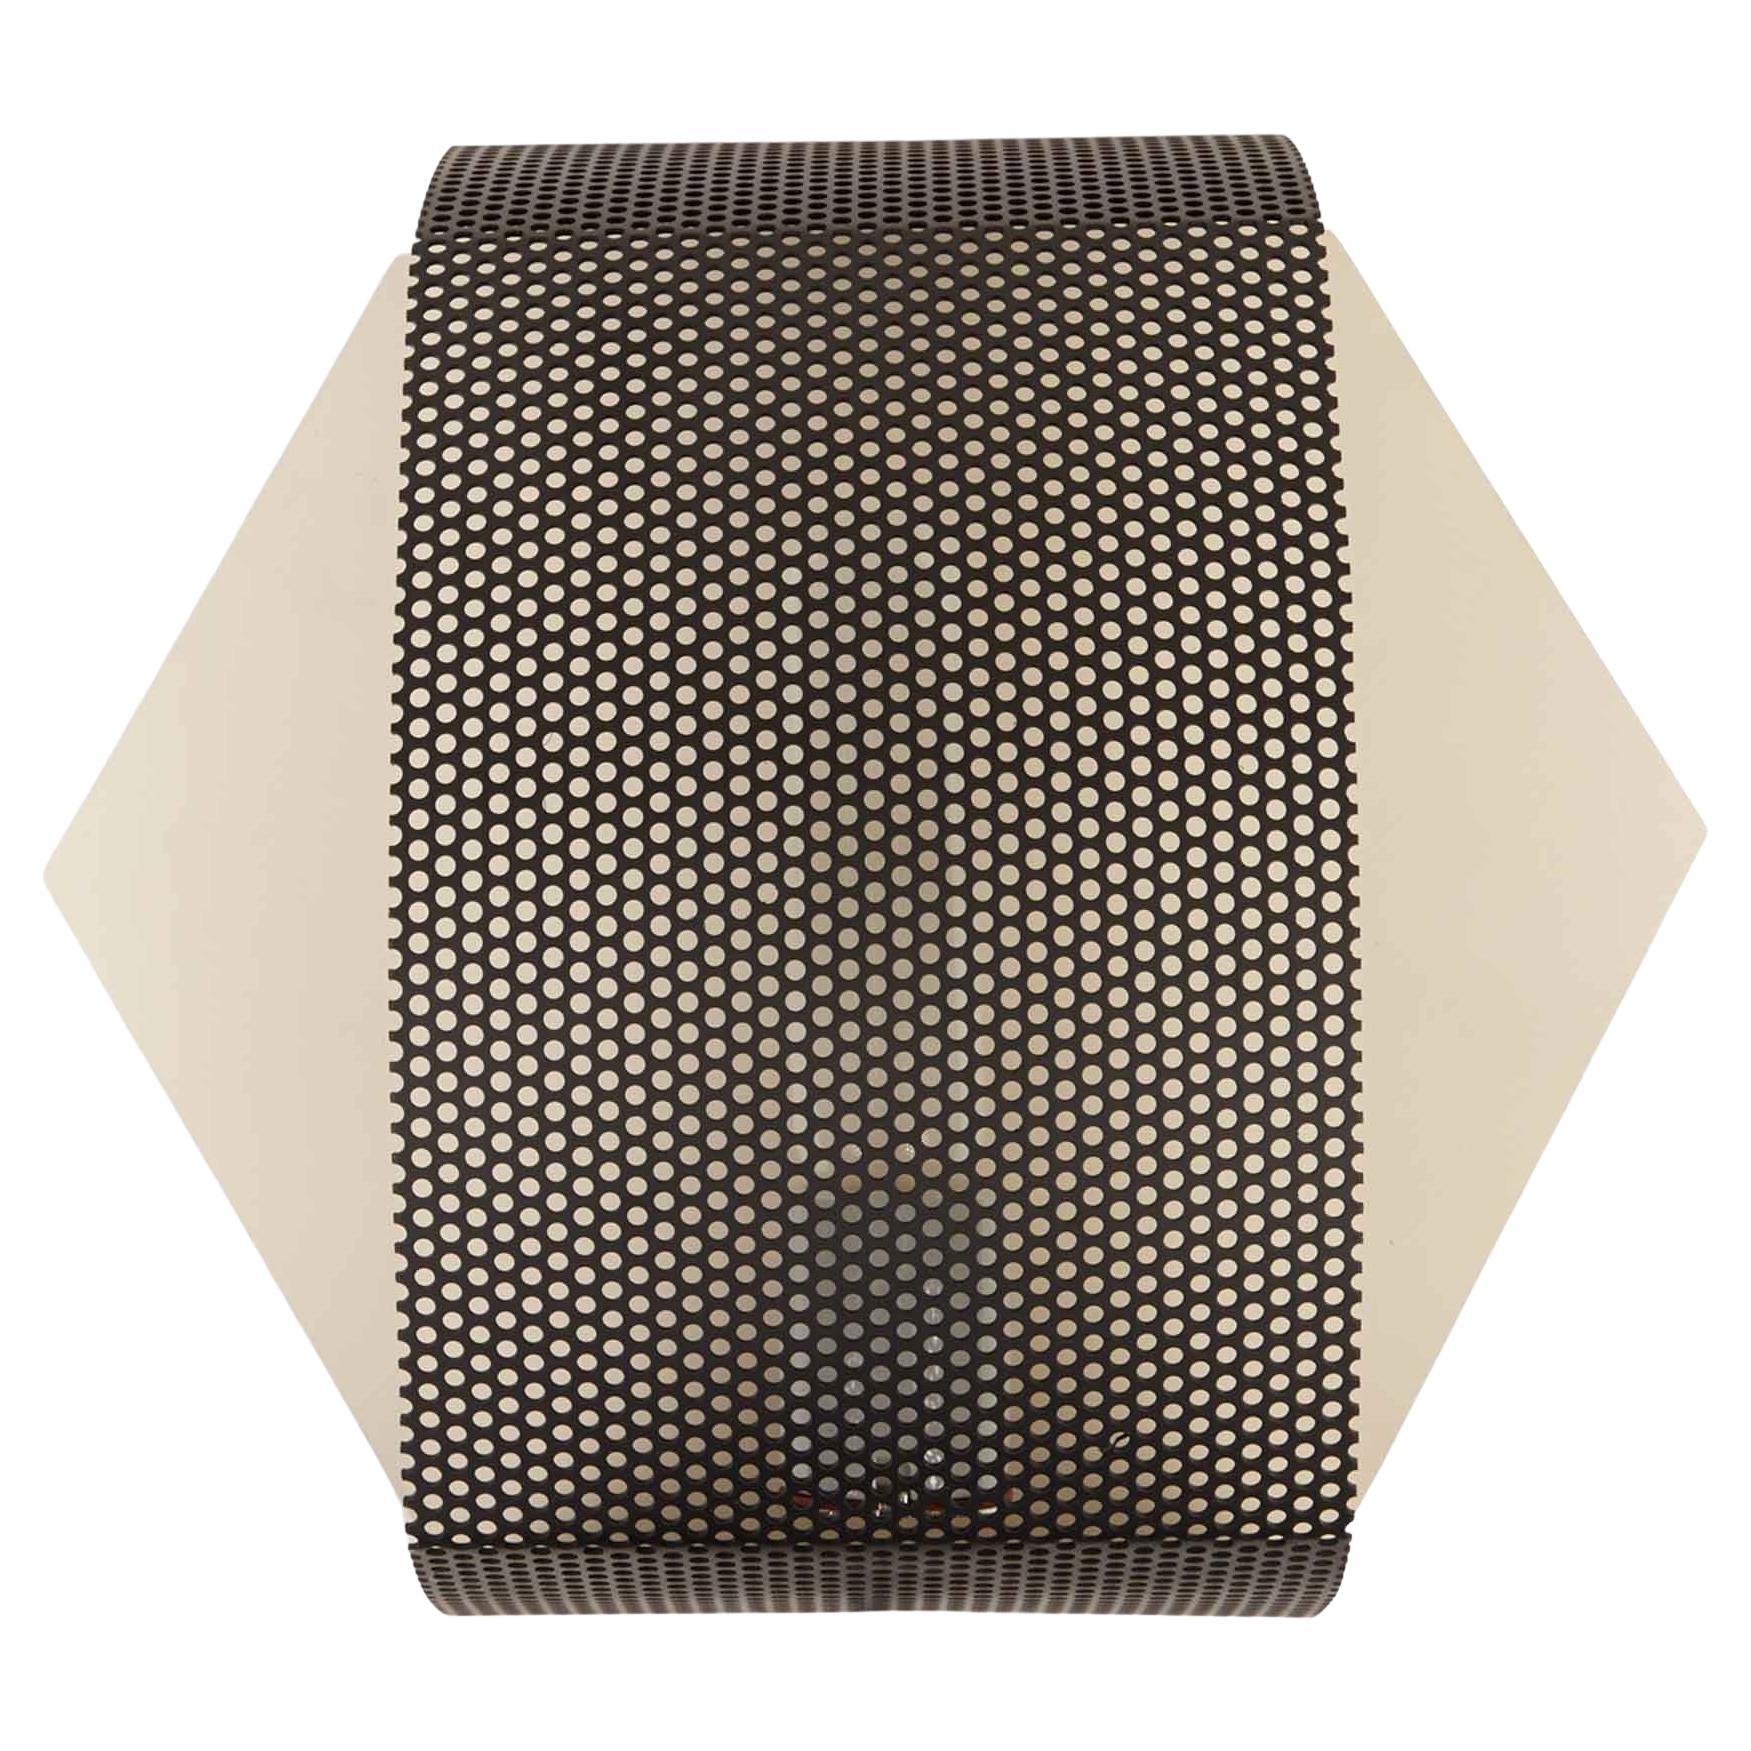 Hexagon Perforated Sconce by Lawson-Fenning